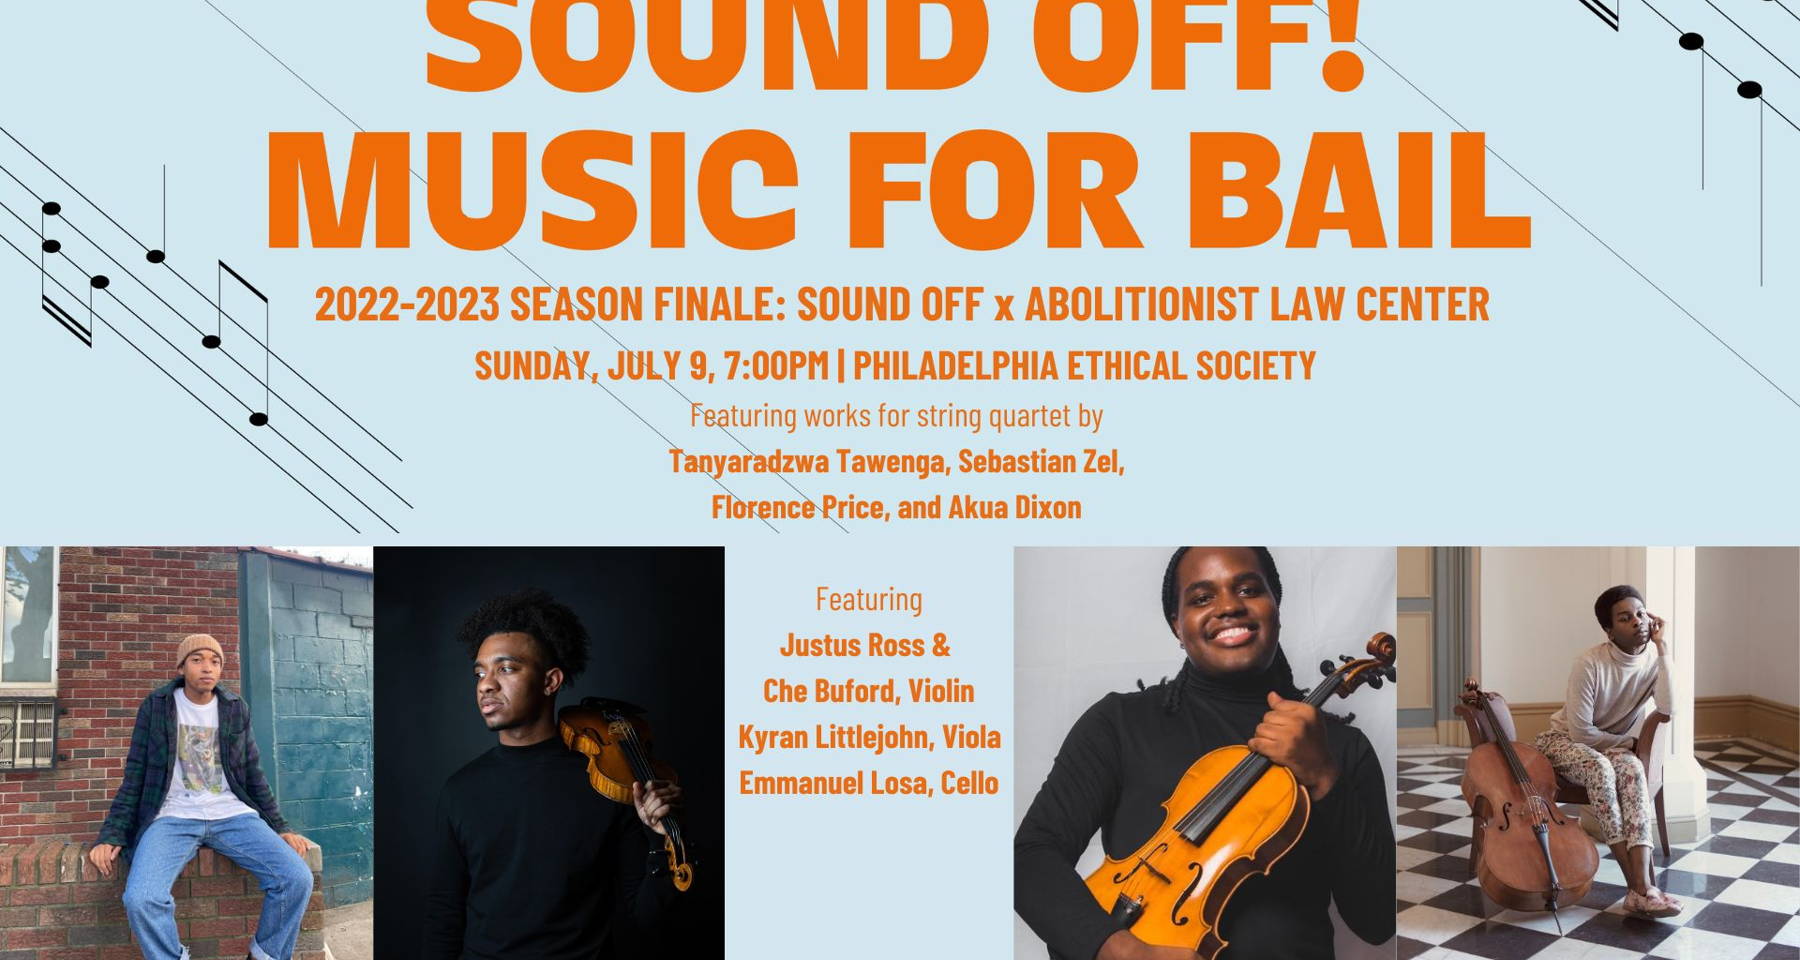 Sound Off x Abolitionist Law Center @ Philadelphia Ethical Society: 2022-2023 Finale & Philly Debut!